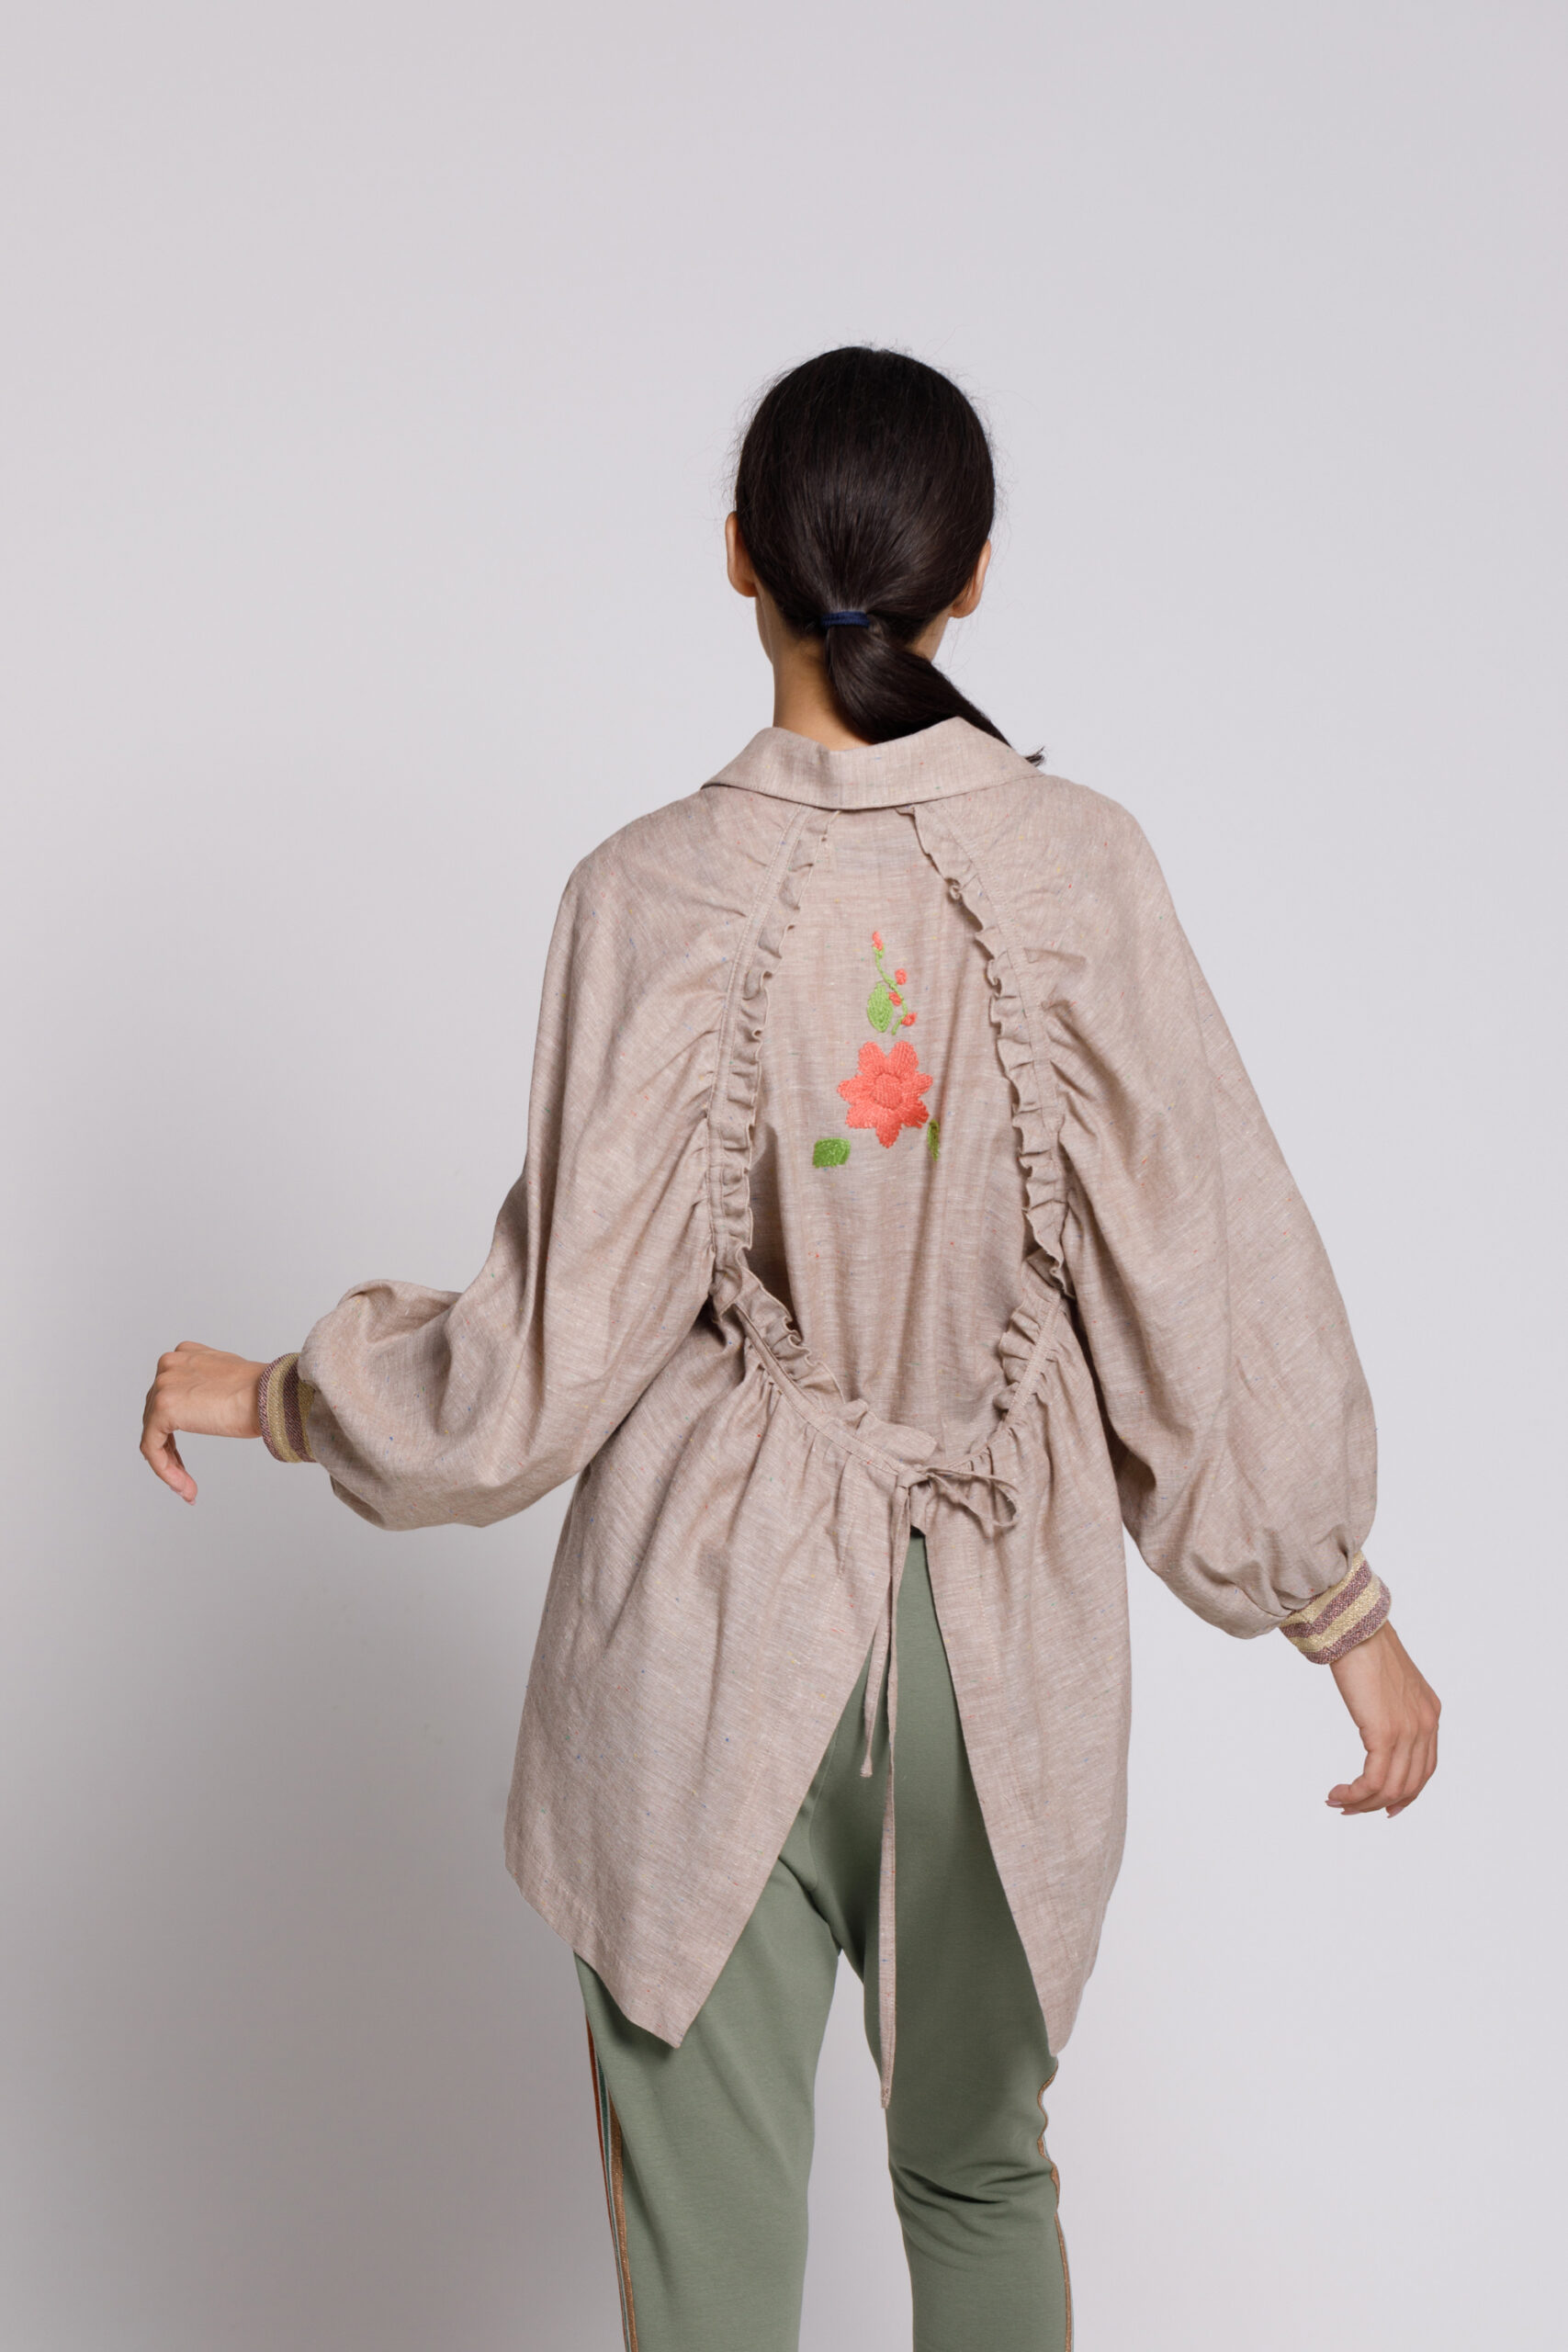 MARINA Versatile shirt in cream with floral embroidery. Natural fabrics, original design, handmade embroidery